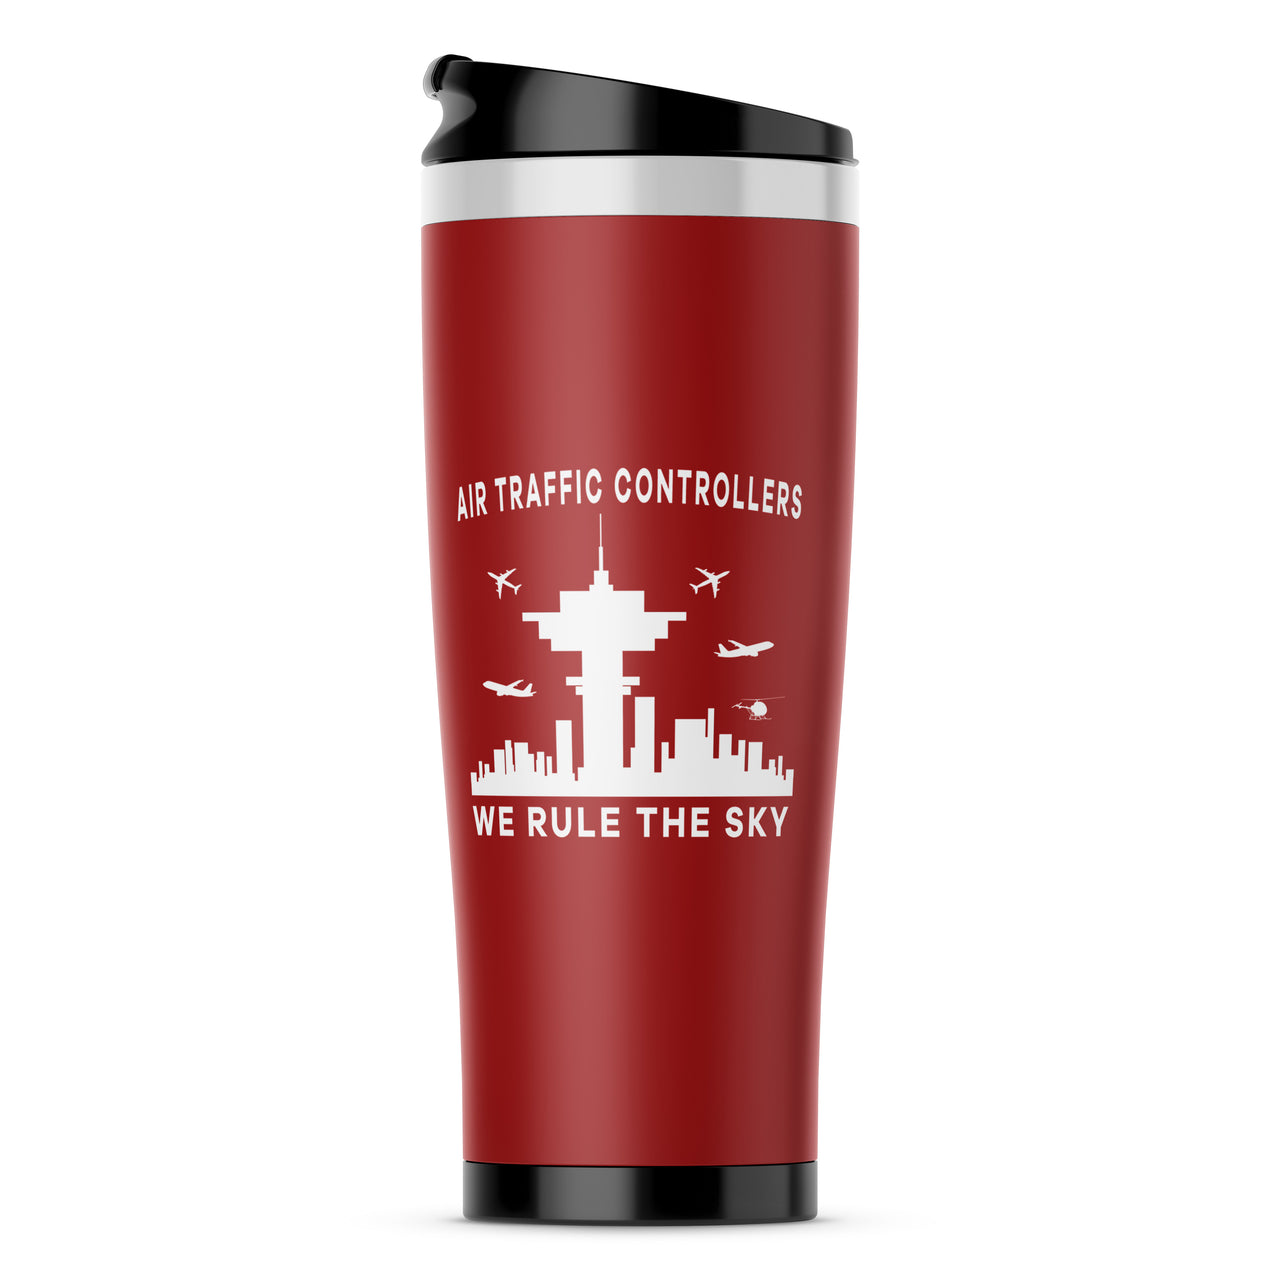 Air Traffic Controllers - We Rule The Sky Designed Travel Mugs